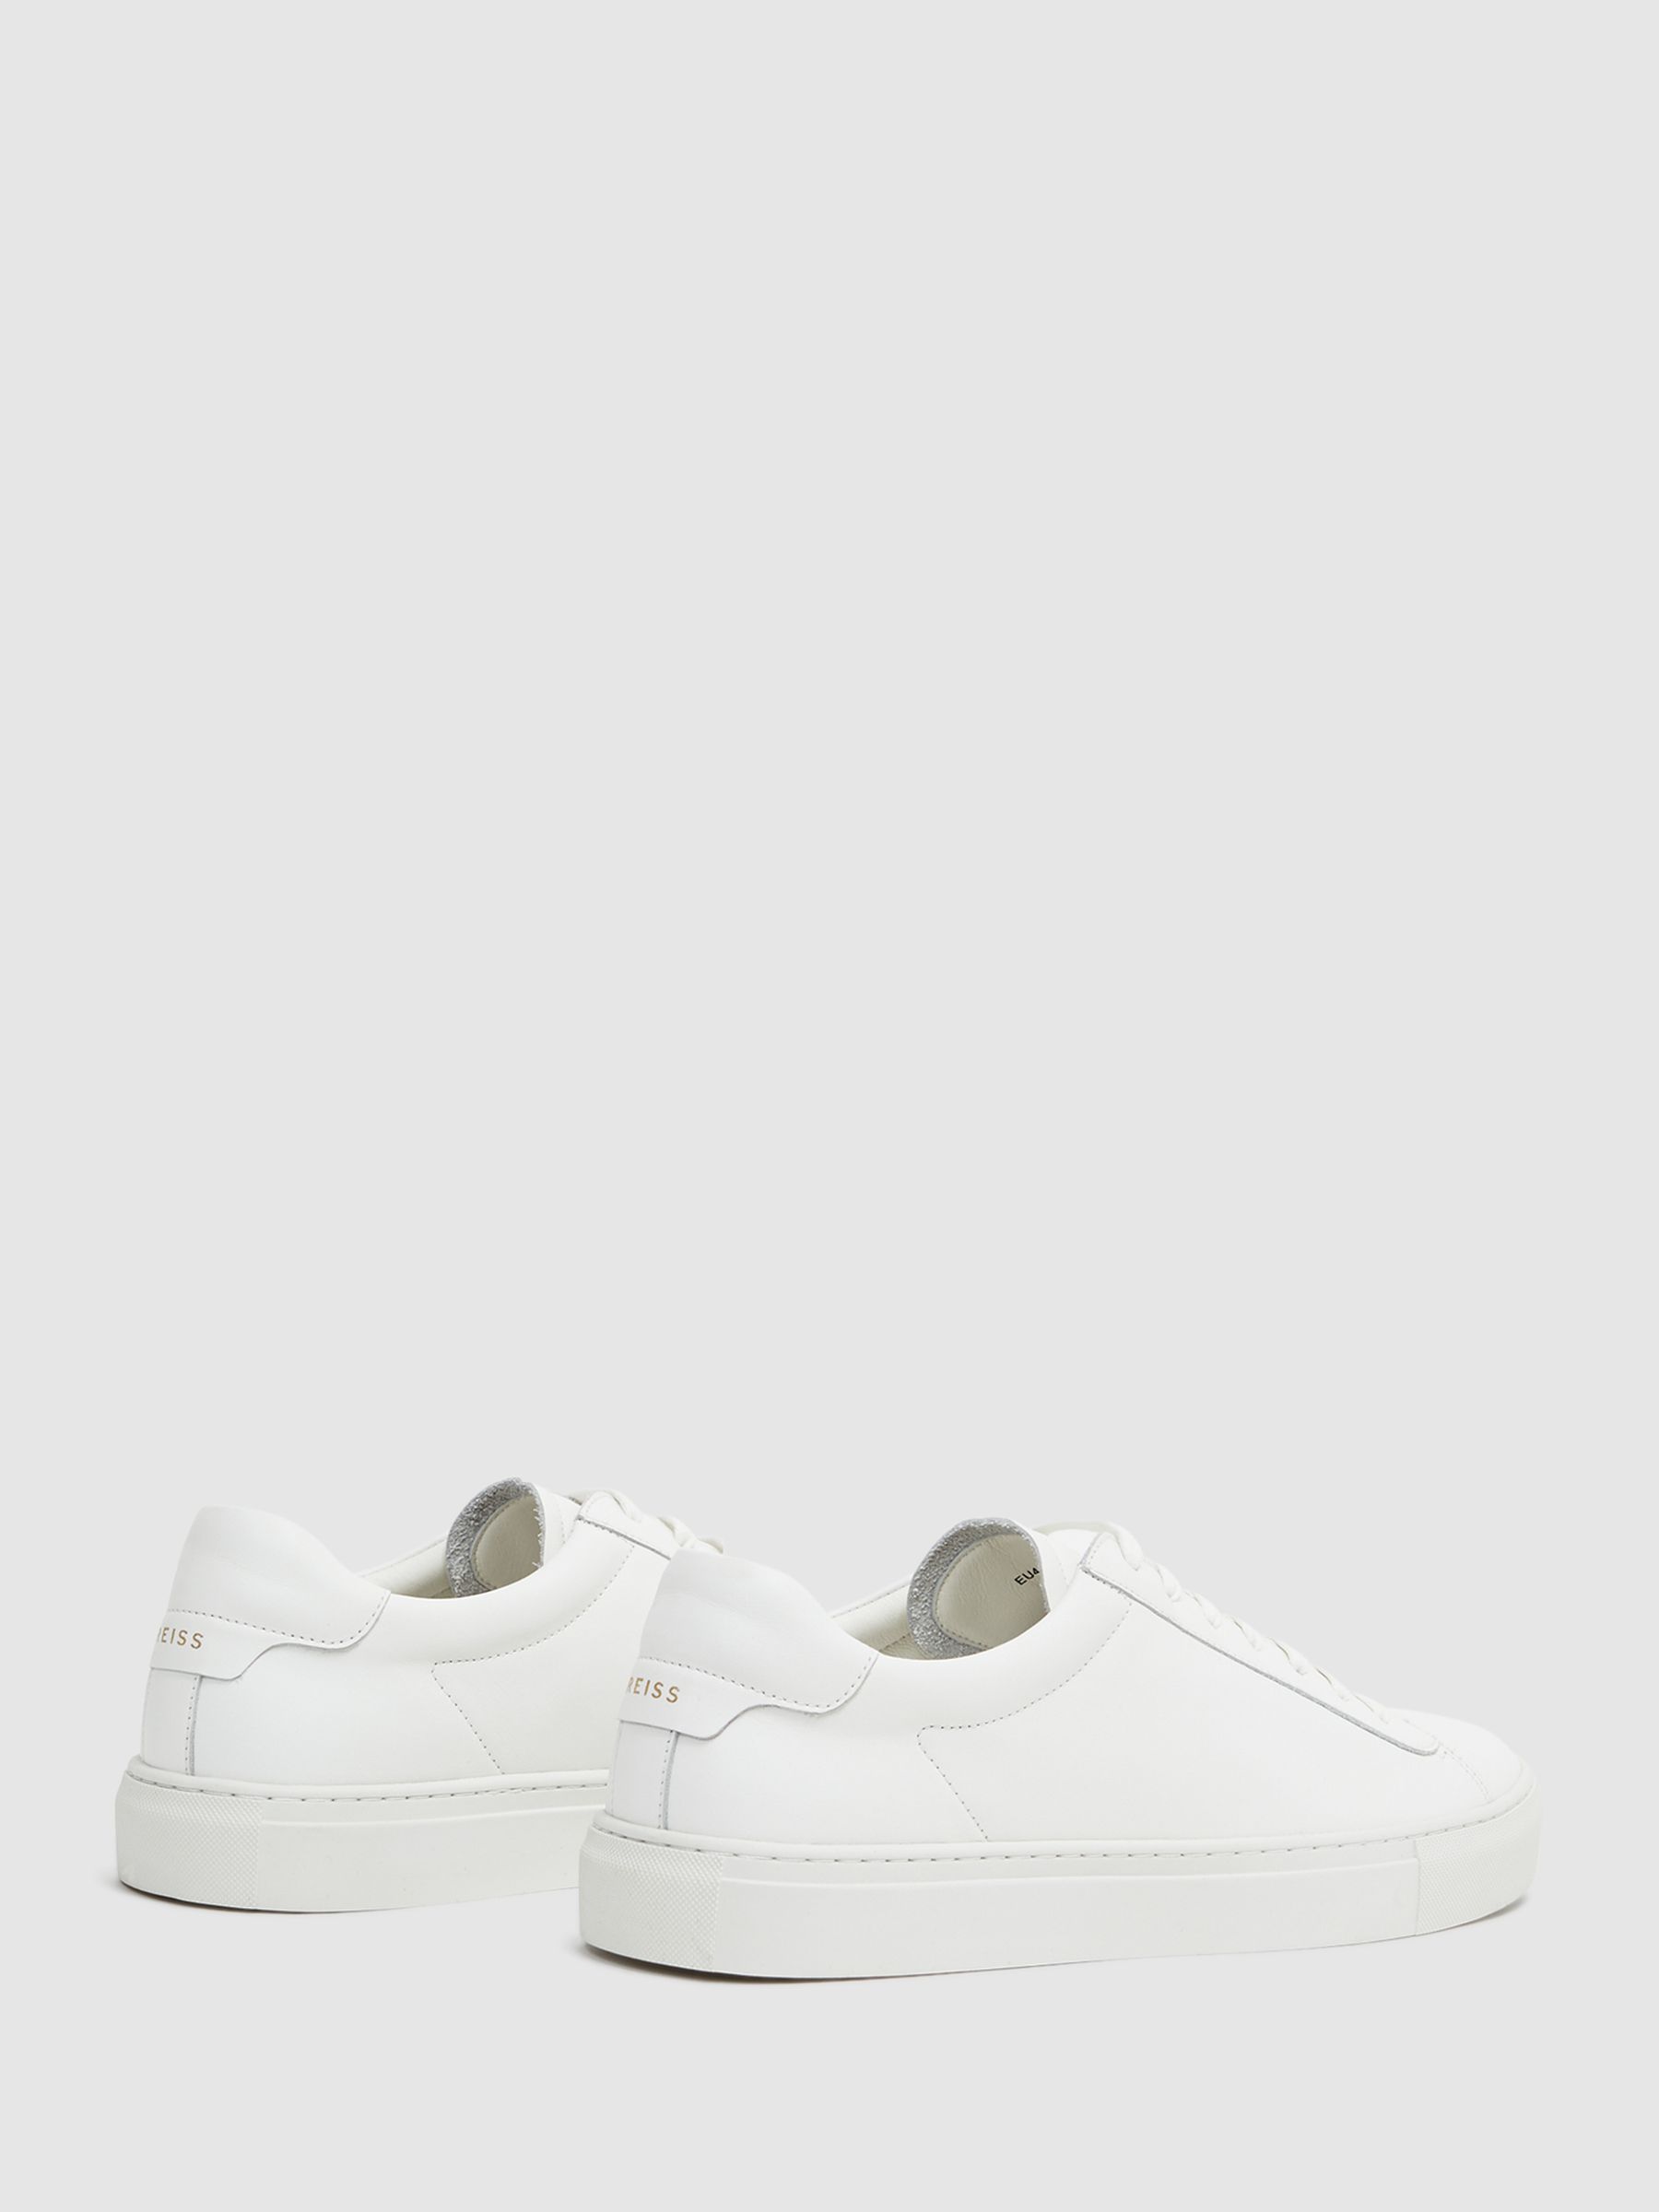 Reiss Finley Leather Trainers - REISS